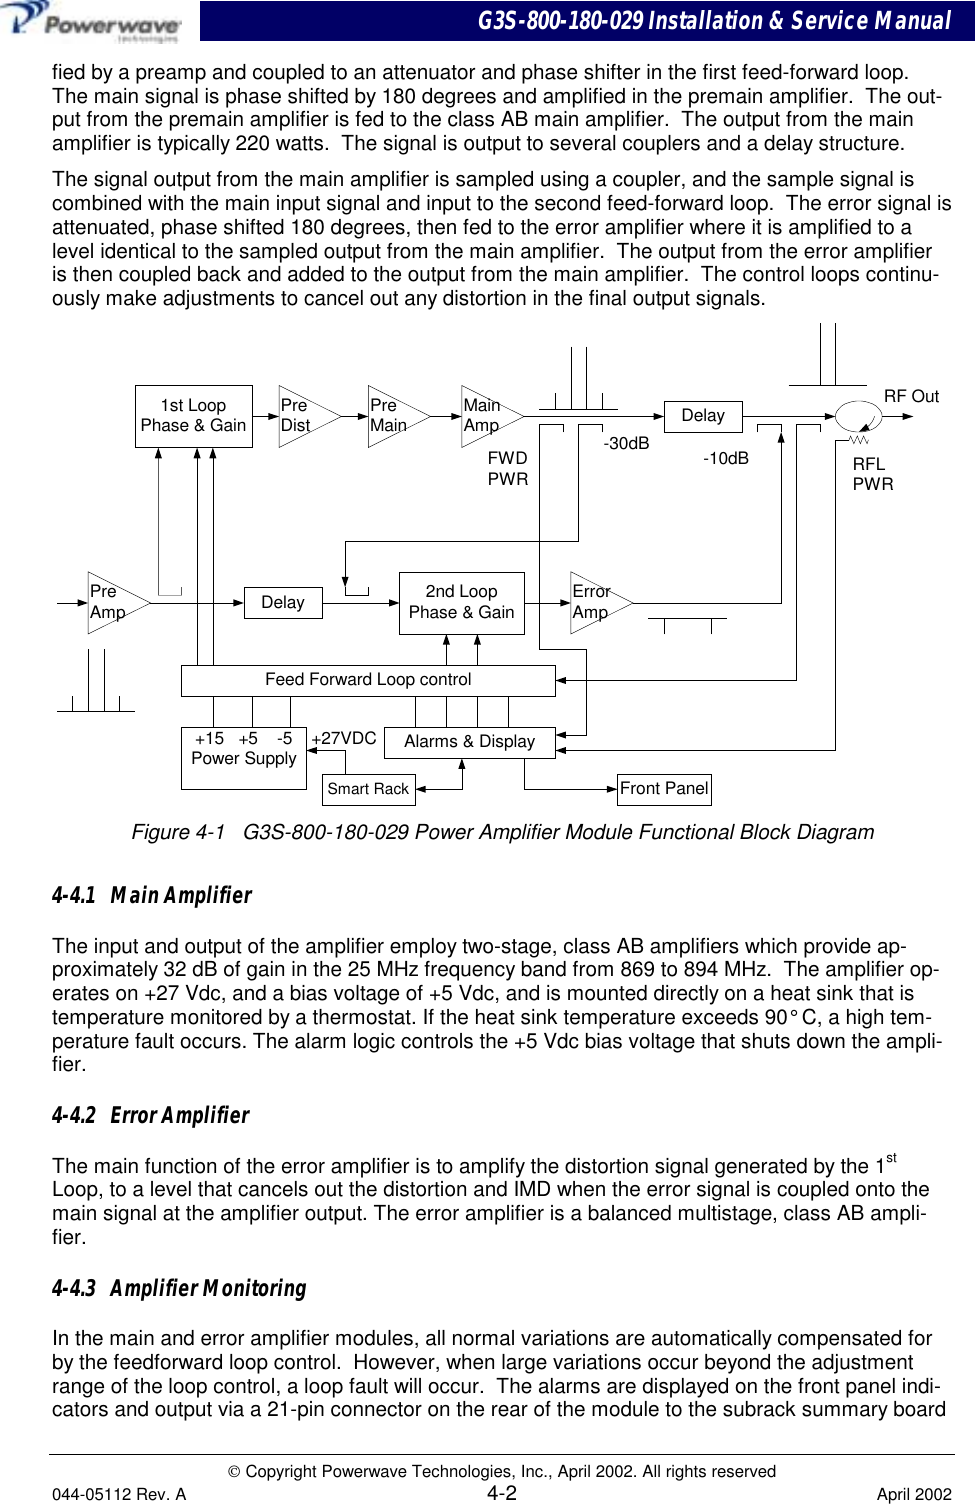 G3S-800-180-029 Installation &amp; Service Manual Copyright Powerwave Technologies, Inc., April 2002. All rights reserved044-05112 Rev. A 4-2 April 2002fied by a preamp and coupled to an attenuator and phase shifter in the first feed-forward loop.The main signal is phase shifted by 180 degrees and amplified in the premain amplifier.  The out-put from the premain amplifier is fed to the class AB main amplifier.  The output from the mainamplifier is typically 220 watts.  The signal is output to several couplers and a delay structure.The signal output from the main amplifier is sampled using a coupler, and the sample signal iscombined with the main input signal and input to the second feed-forward loop.  The error signal isattenuated, phase shifted 180 degrees, then fed to the error amplifier where it is amplified to alevel identical to the sampled output from the main amplifier.  The output from the error amplifieris then coupled back and added to the output from the main amplifier.  The control loops continu-ously make adjustments to cancel out any distortion in the final output signals.PreAmpPreMain MainAmpErrorAmpDelayFeed Forward Loop control2nd LoopPhase &amp; Gain1st LoopPhase &amp; Gain DelayAlarms &amp; Display+15   +5    -5Power Supply-30dB -10dBRF OutRFLPWRFWDPWRFront PanelSmart Rack+27VDCPreDistFigure 4-1   G3S-800-180-029 Power Amplifier Module Functional Block Diagram4-4.1   Main AmplifierThe input and output of the amplifier employ two-stage, class AB amplifiers which provide ap-proximately 32 dB of gain in the 25 MHz frequency band from 869 to 894 MHz.  The amplifier op-erates on +27 Vdc, and a bias voltage of +5 Vdc, and is mounted directly on a heat sink that istemperature monitored by a thermostat. If the heat sink temperature exceeds 90° C, a high tem-perature fault occurs. The alarm logic controls the +5 Vdc bias voltage that shuts down the ampli-fier.4-4.2   Error AmplifierThe main function of the error amplifier is to amplify the distortion signal generated by the 1stLoop, to a level that cancels out the distortion and IMD when the error signal is coupled onto themain signal at the amplifier output. The error amplifier is a balanced multistage, class AB ampli-fier.4-4.3   Amplifier MonitoringIn the main and error amplifier modules, all normal variations are automatically compensated forby the feedforward loop control.  However, when large variations occur beyond the adjustmentrange of the loop control, a loop fault will occur.  The alarms are displayed on the front panel indi-cators and output via a 21-pin connector on the rear of the module to the subrack summary board